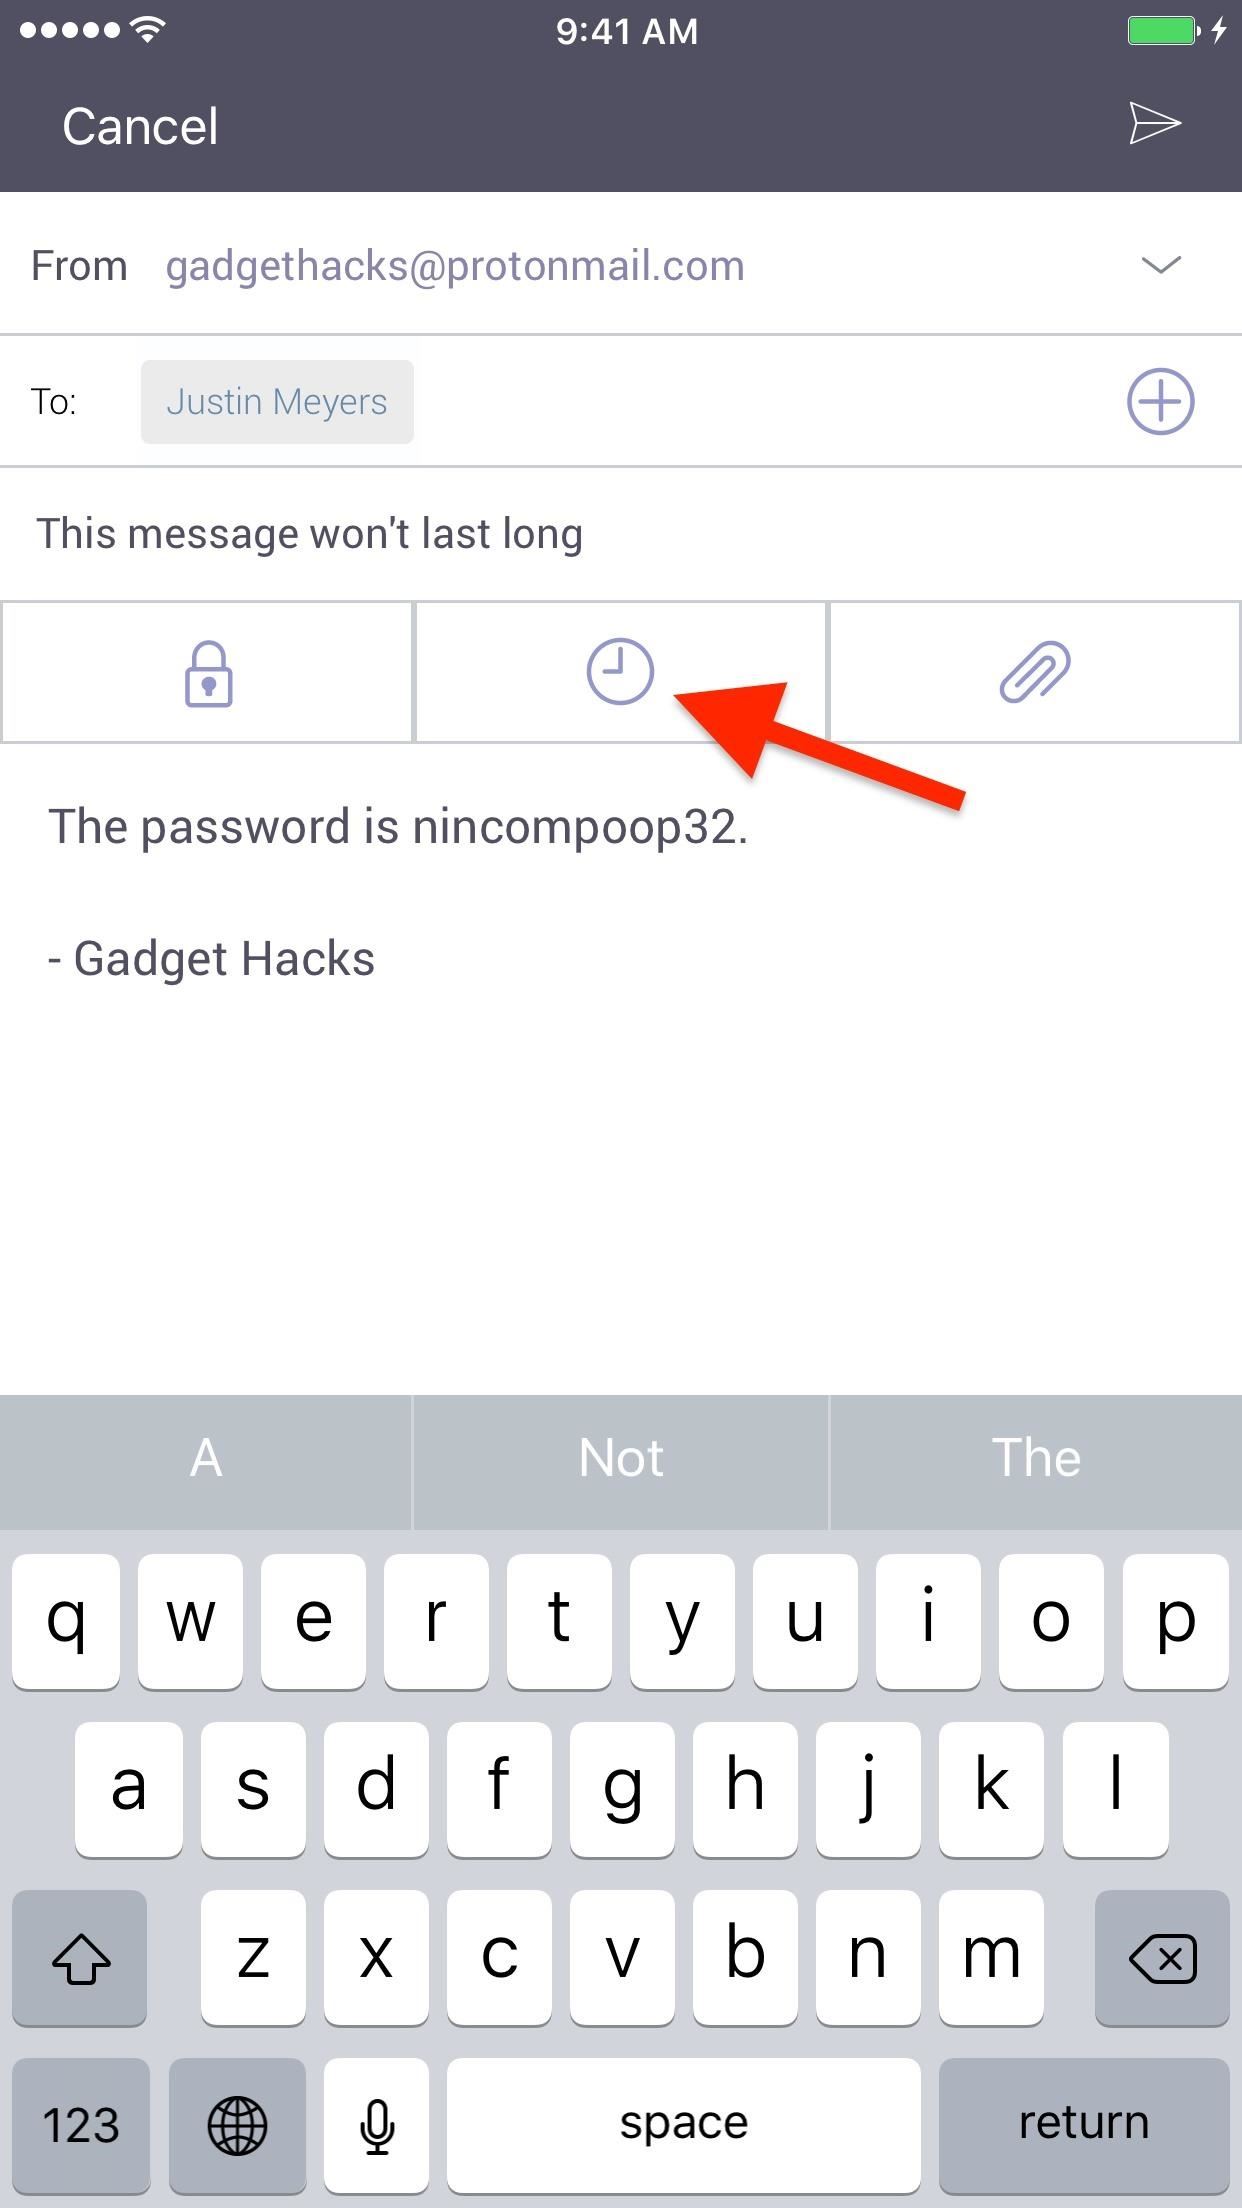 ProtonMail 101: How to Send Self-Destructing Emails